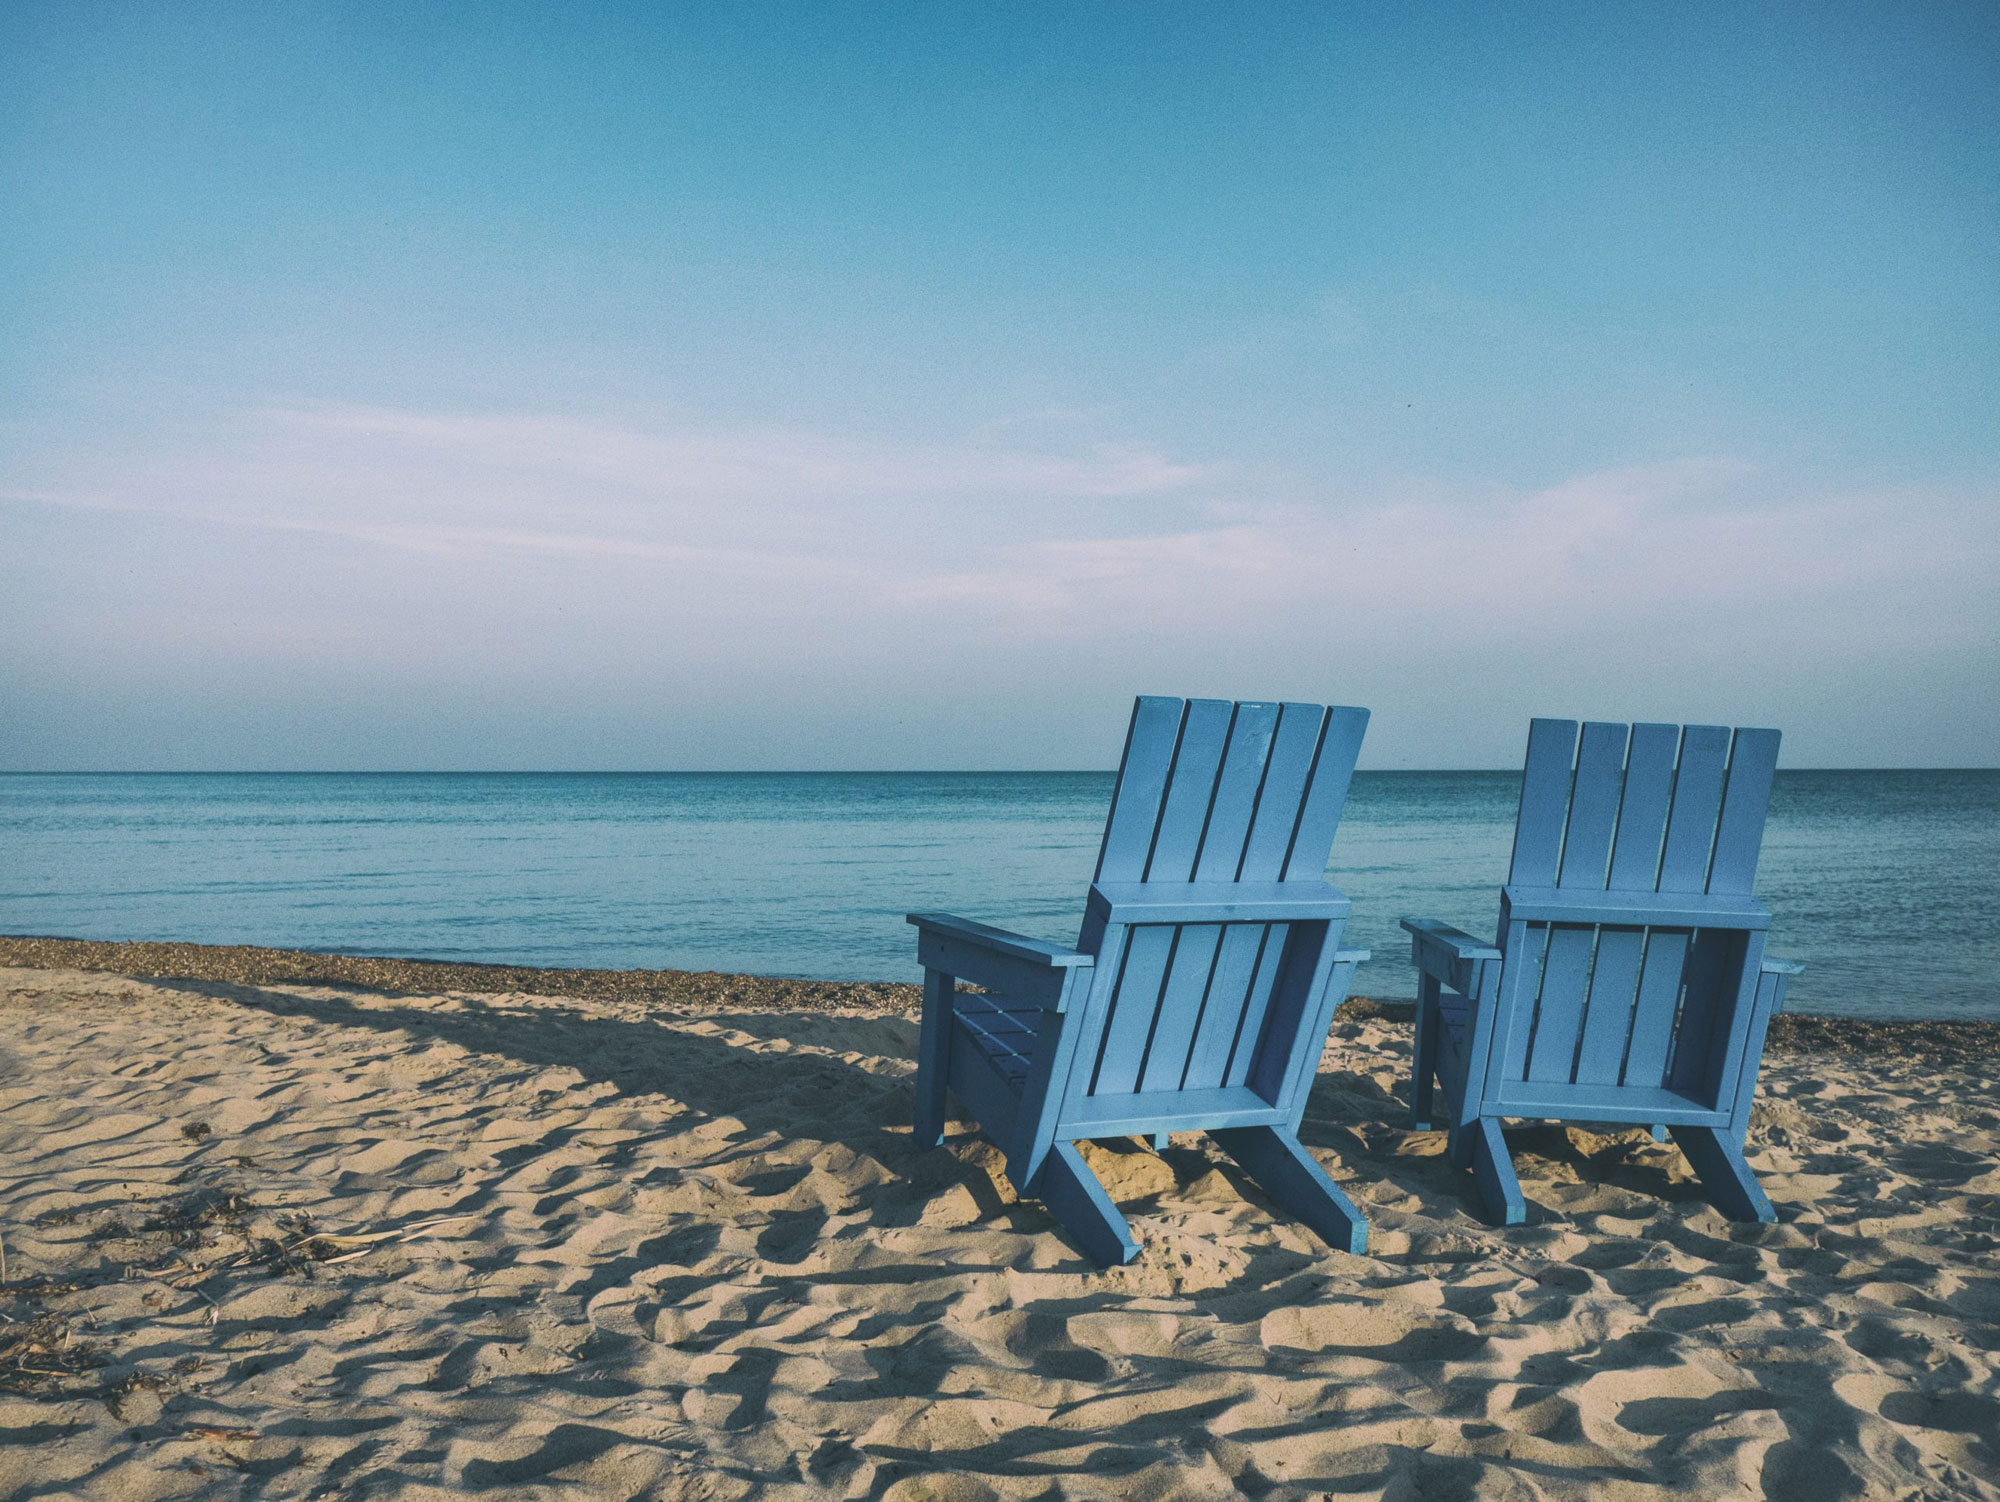 The picture shows to chairs on a beach, representing retirement.